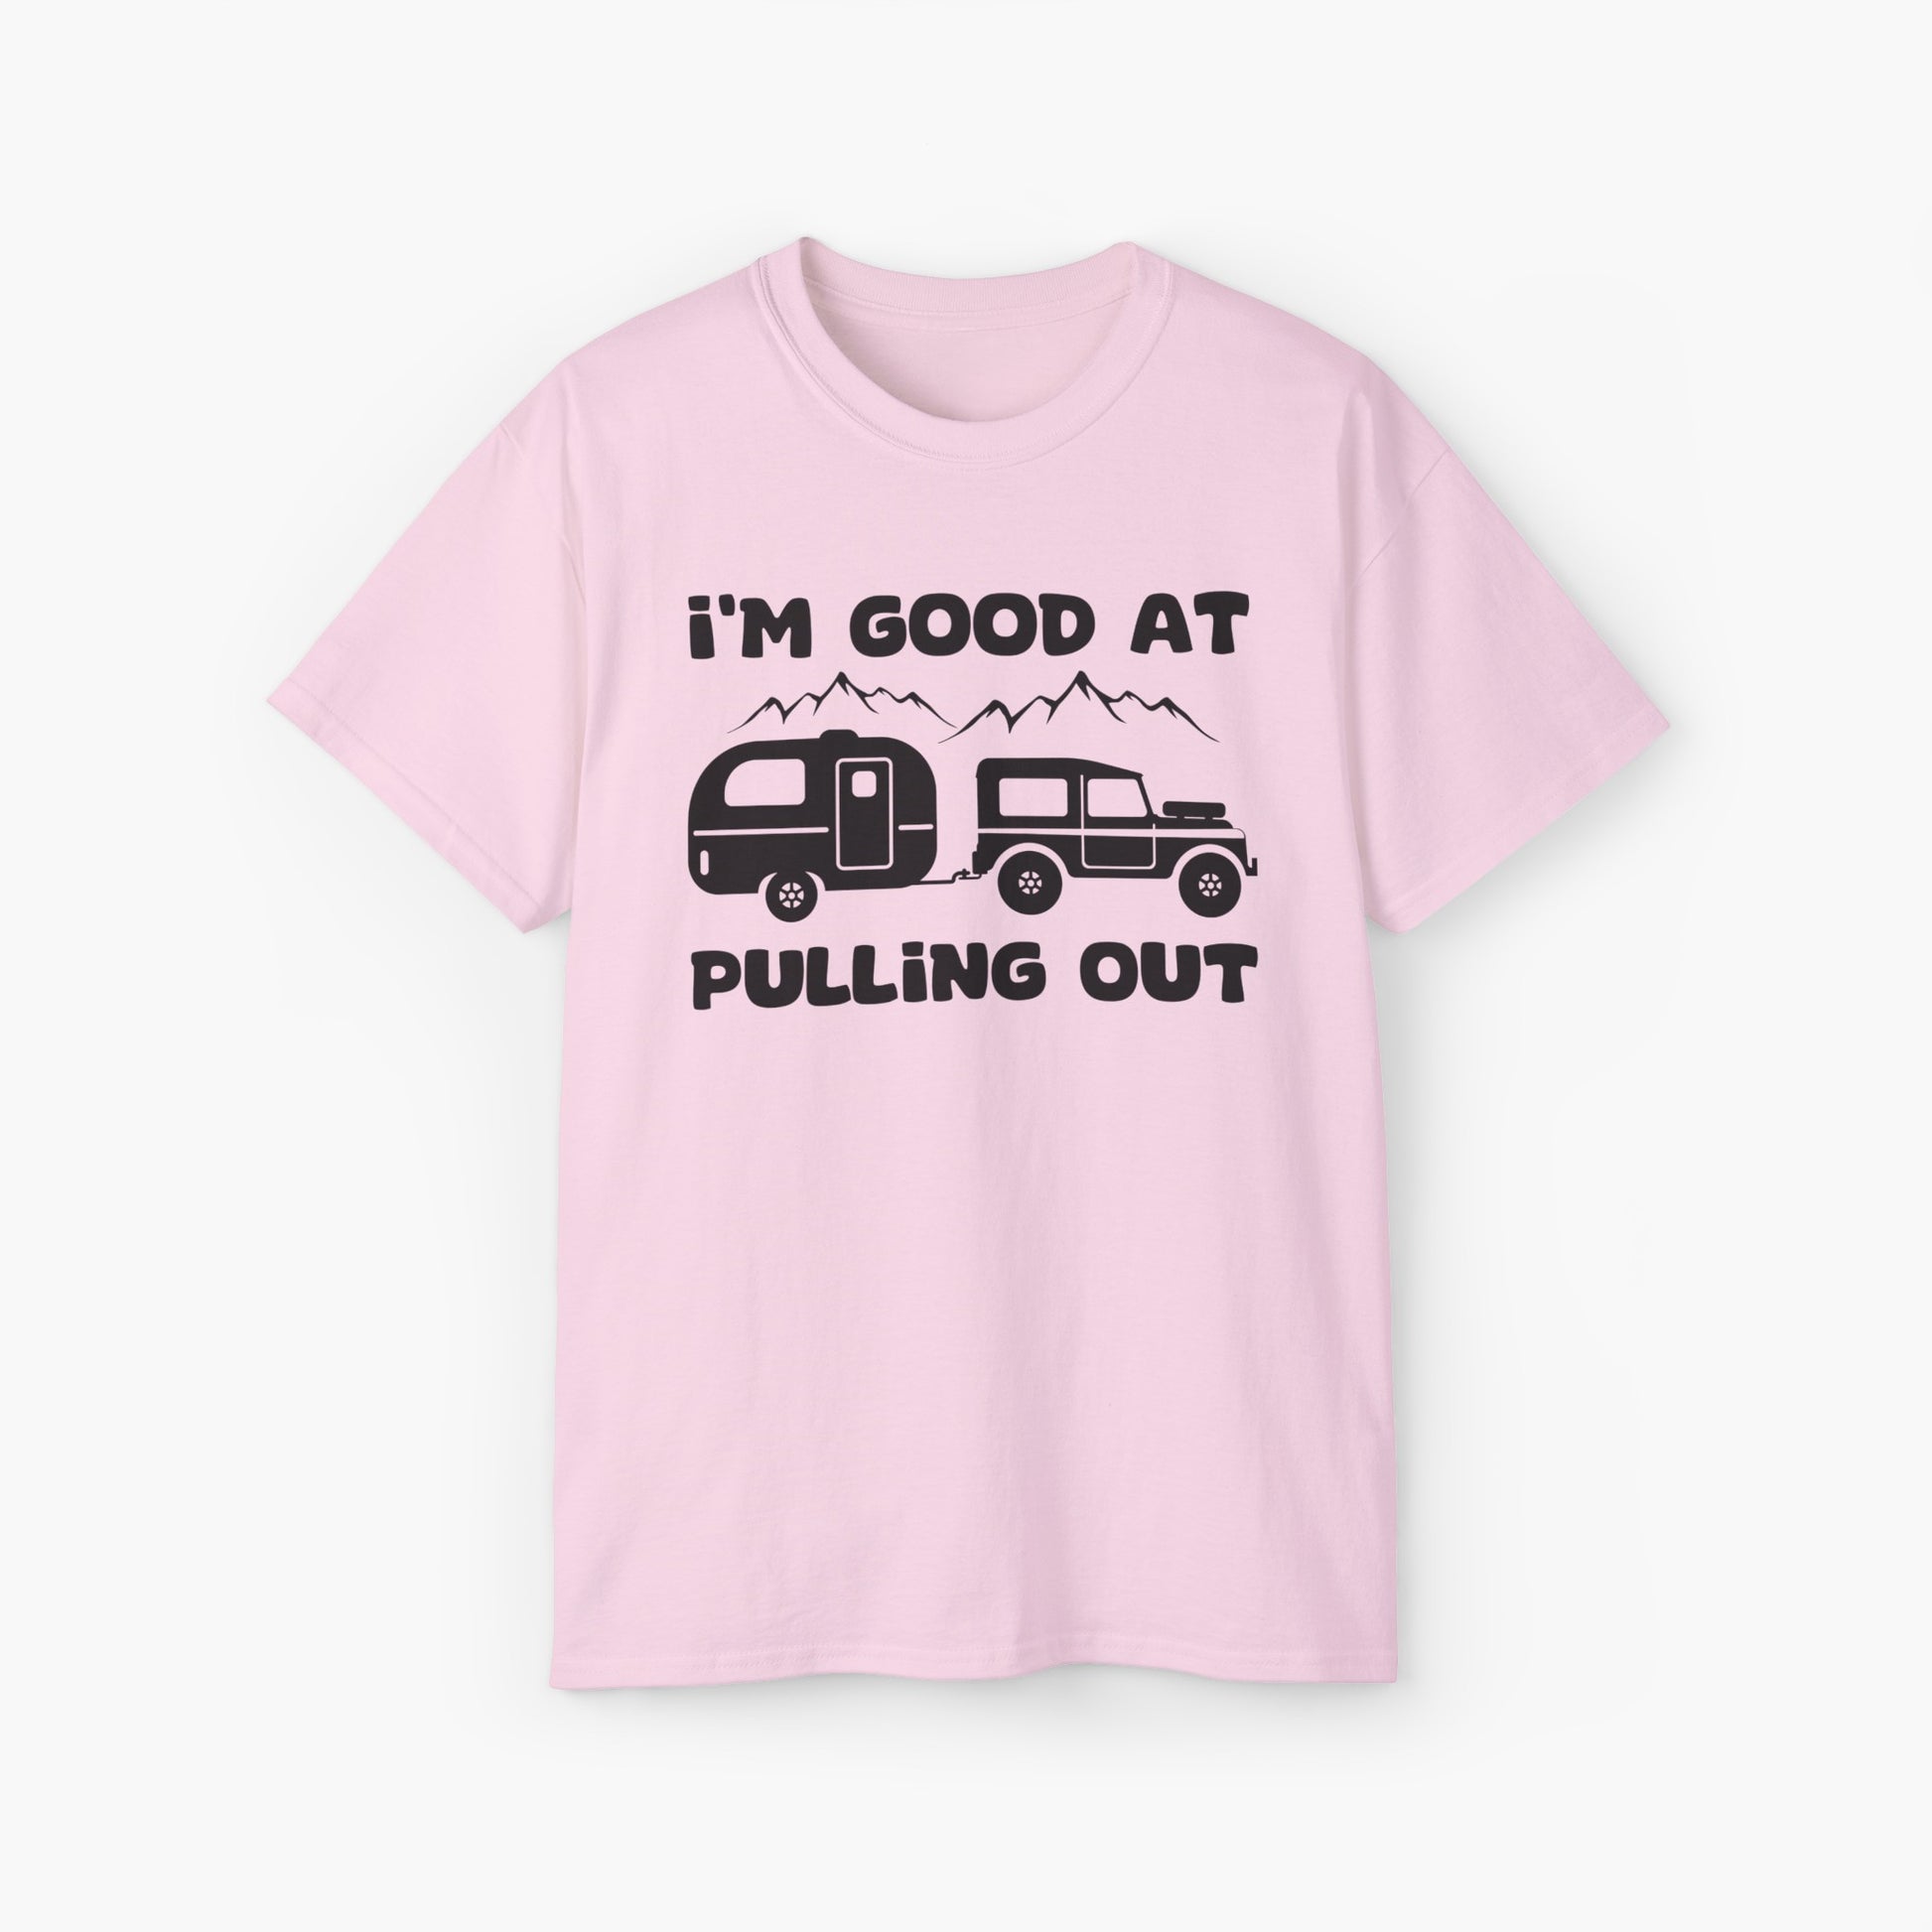 Light pink t-shirt with humorous text 'I'm good at pulling out' featuring an image of a truck pulling a camping van, set against mountains on a plain background.